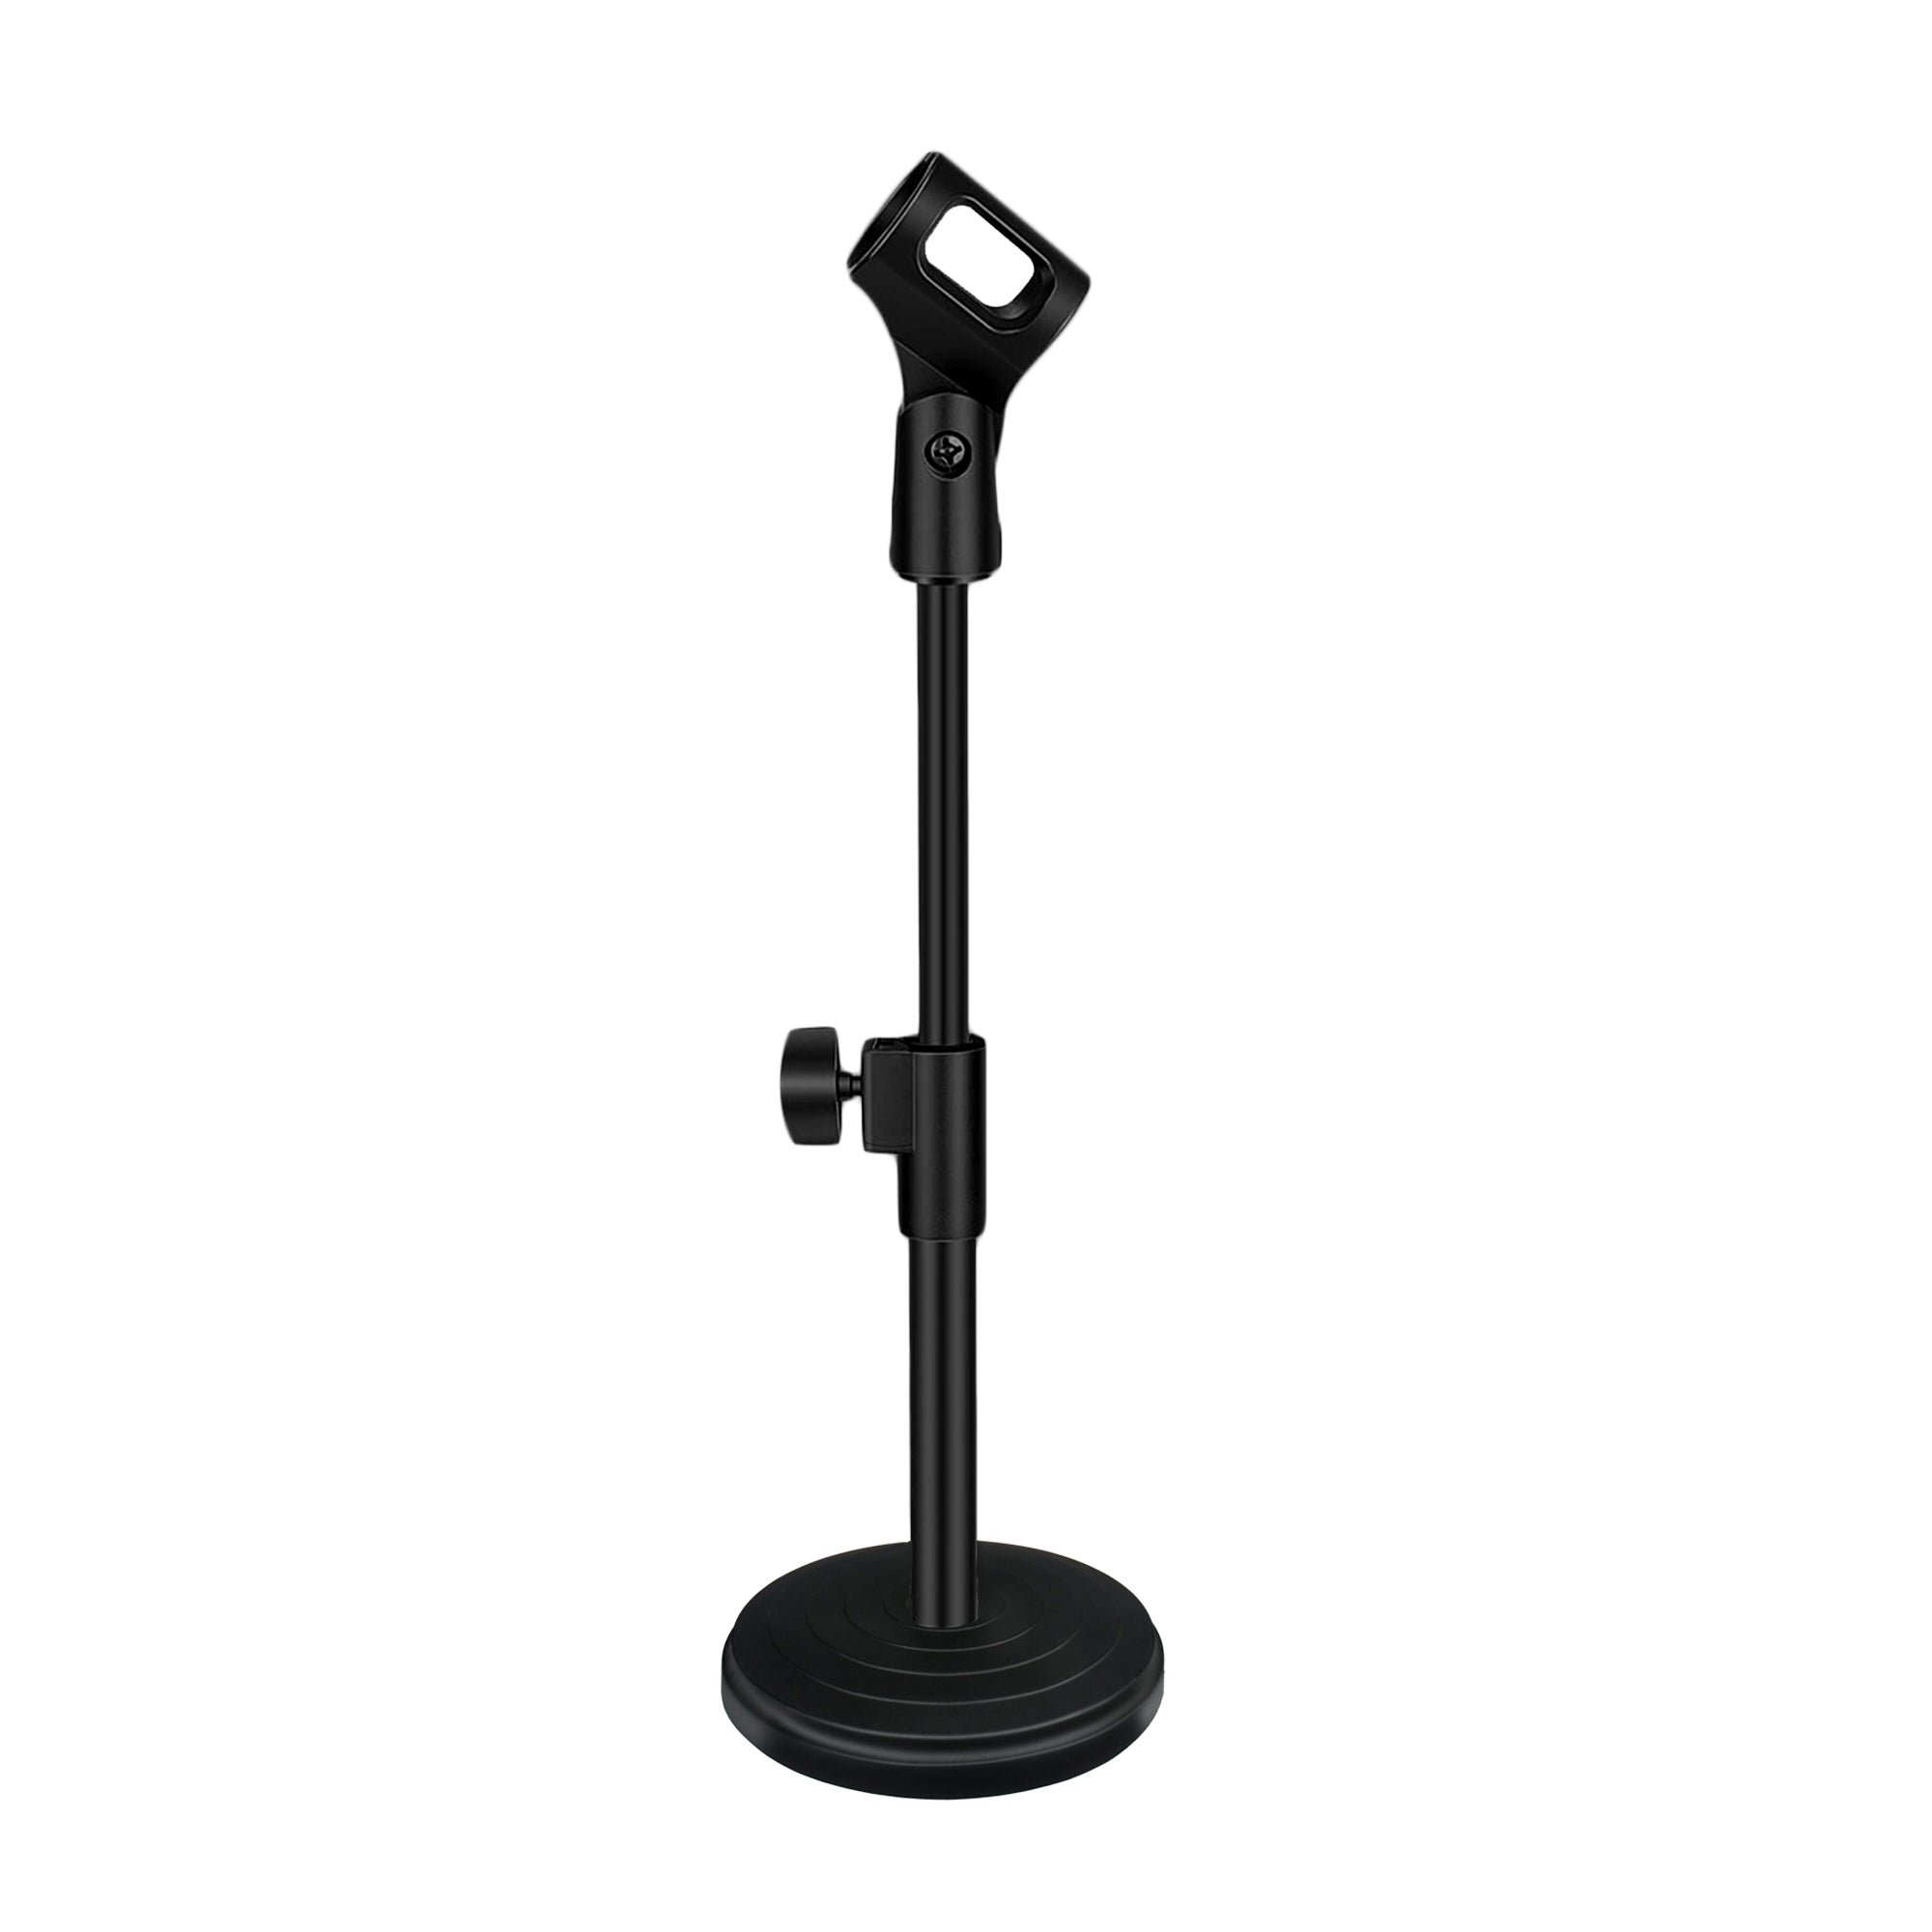 5 Core Round Base Mic Stand Desk Universal Desktop Height Adjustable Table Top Microphone Stand w Mic CLip 1/2 pc